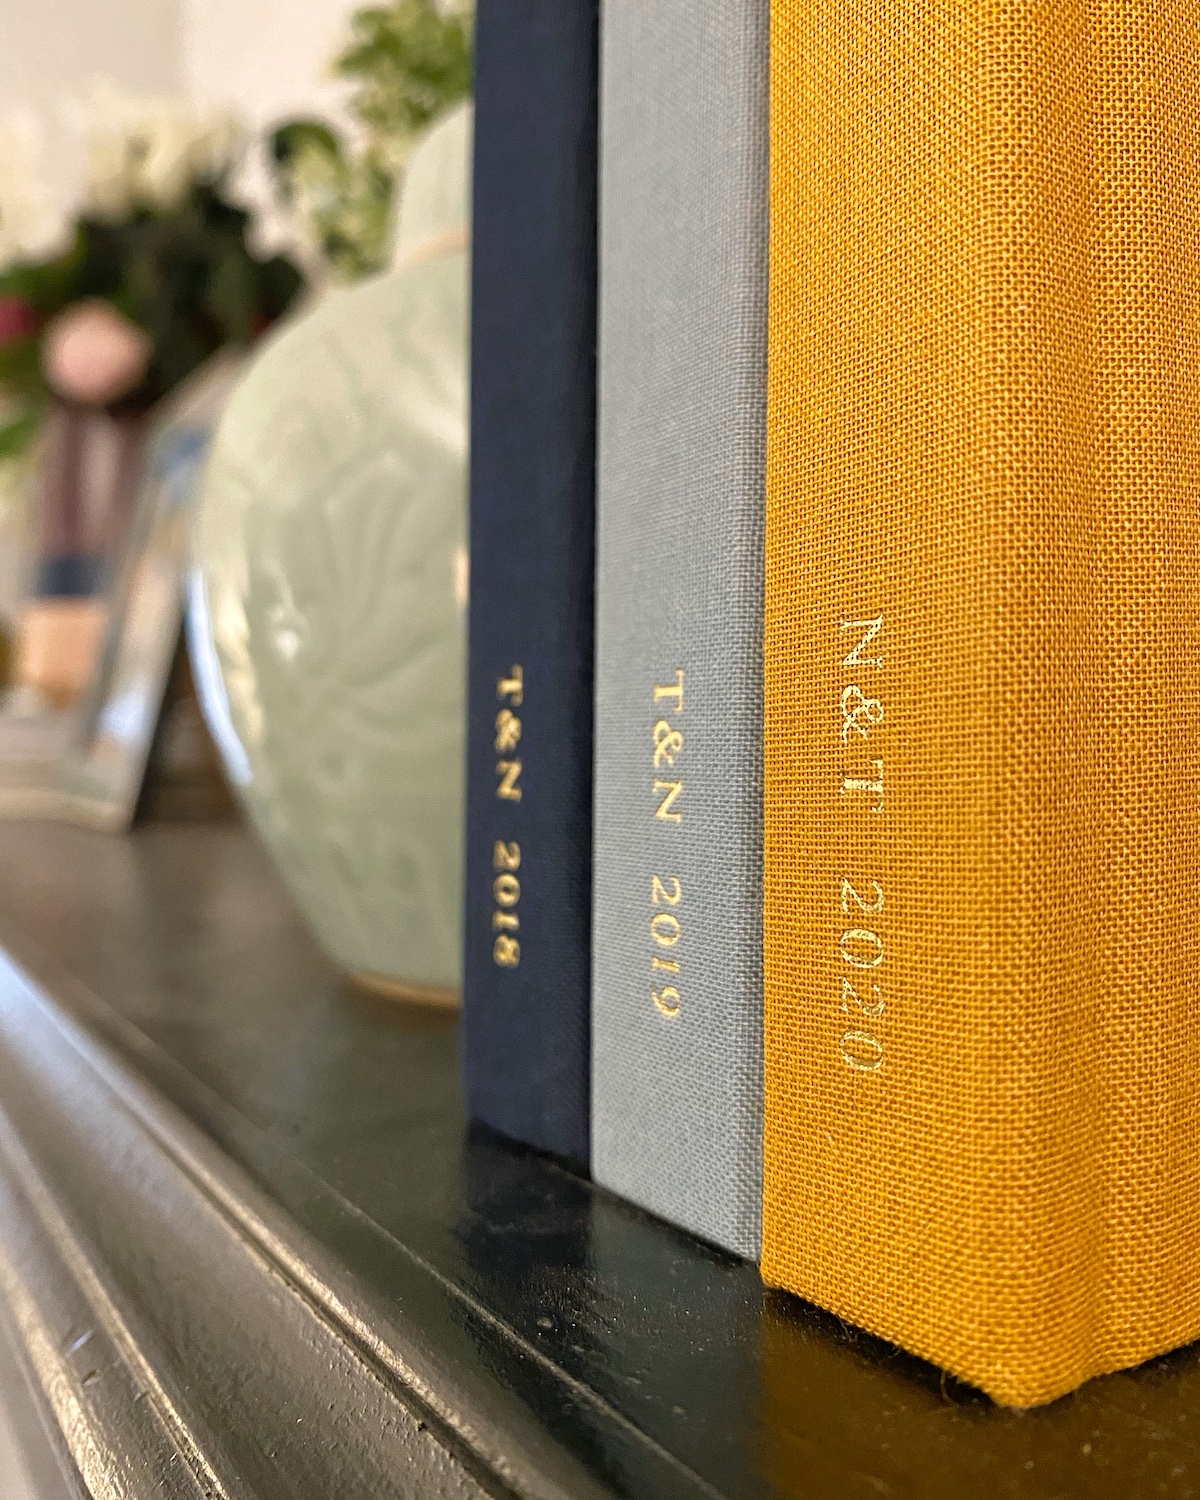 Three consecutive photo yearbooks on a shelf